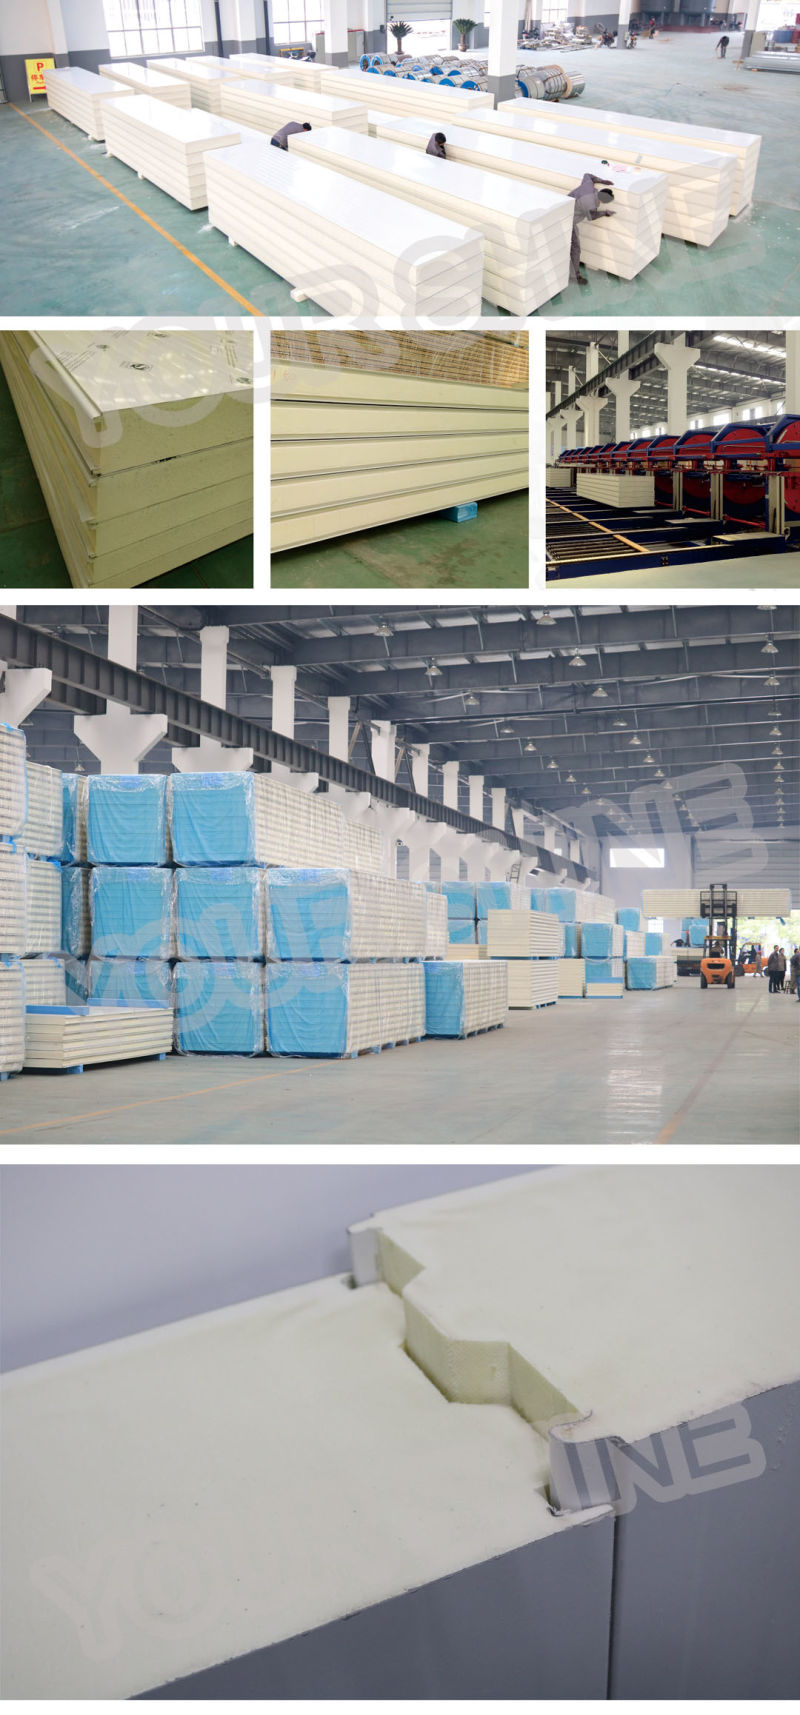 50mm 100mm Polyurethane PU/PUR/PIR Sandwich Panels for Cold Room/Clean Room